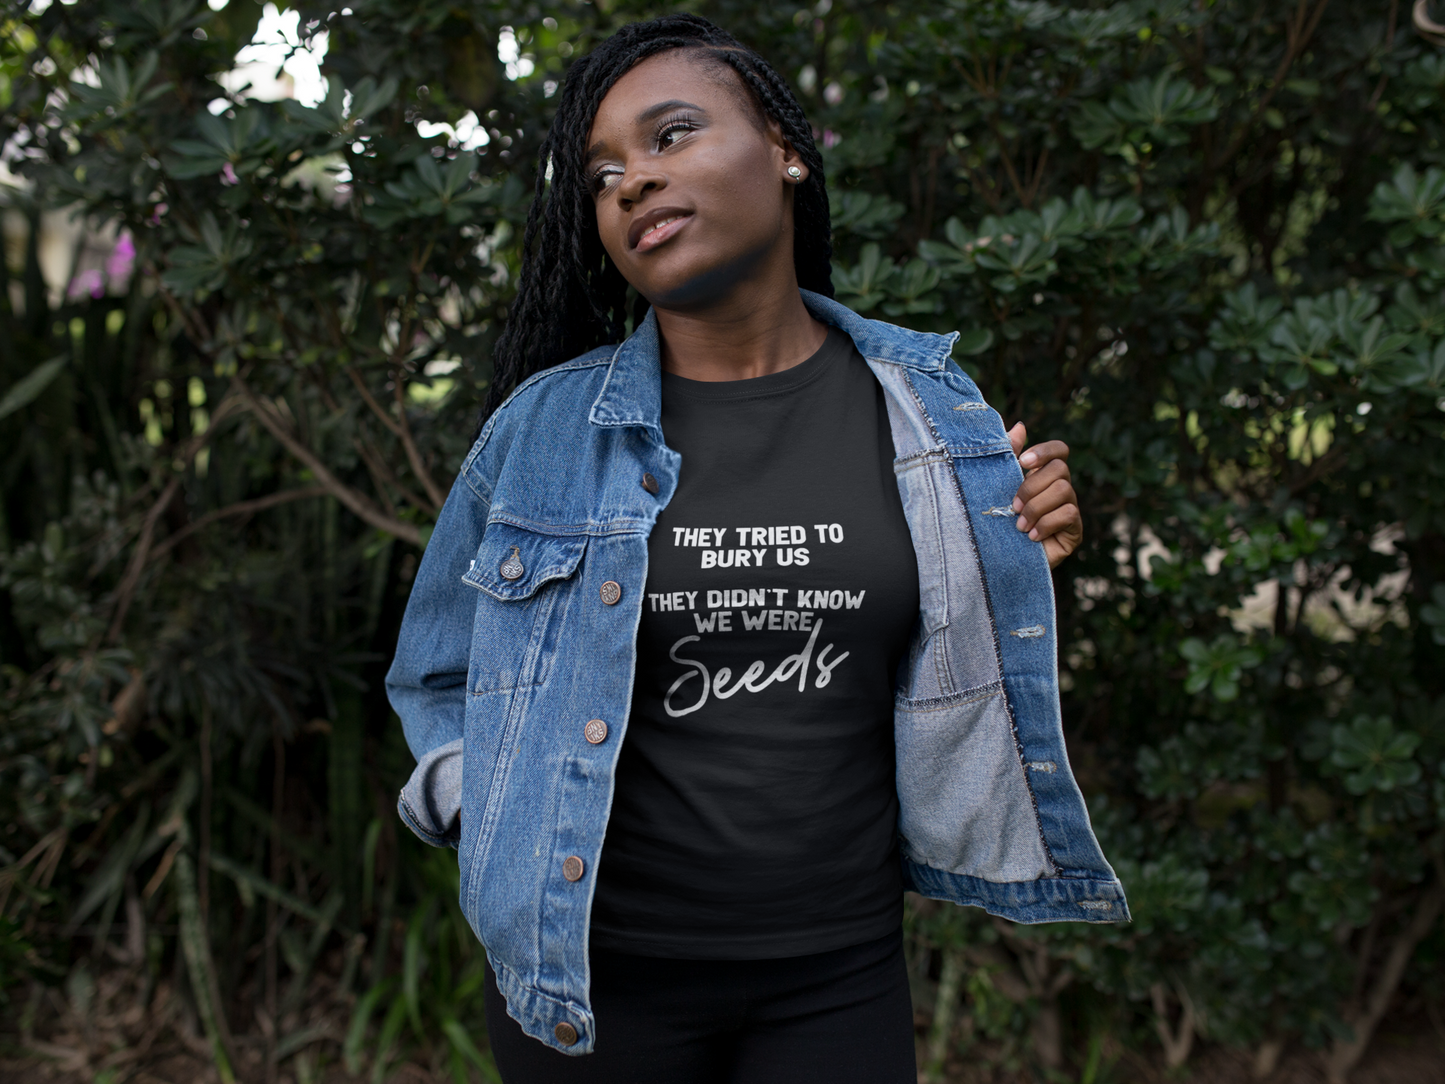 They Tried To Bury Us, They Didn’t Know We Were Seeds T-shirt - Bad Perfectionist Co.